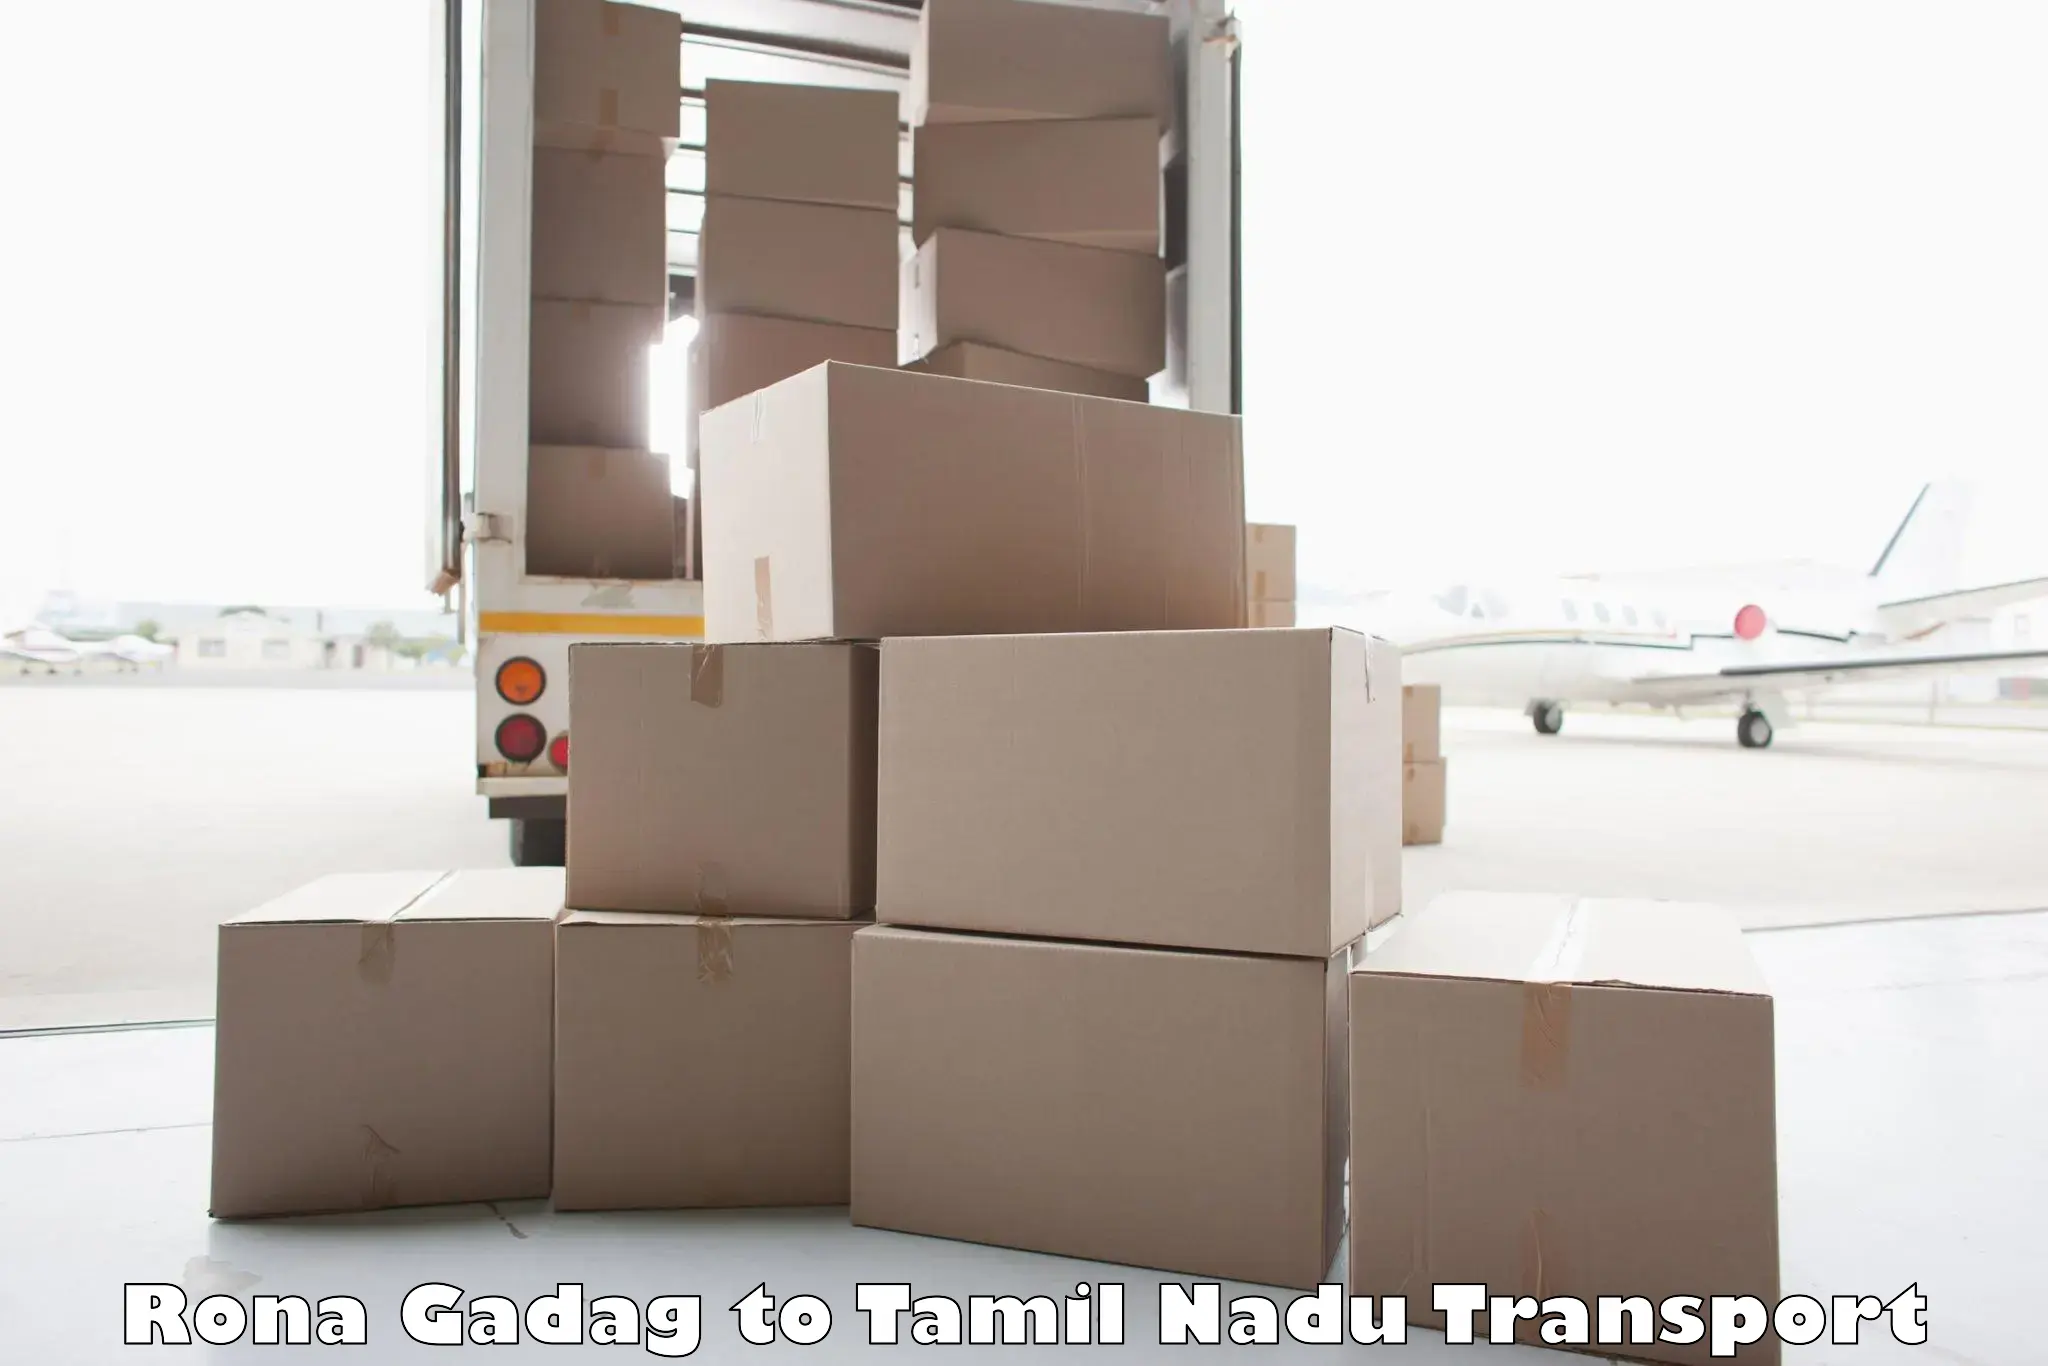 Express transport services Rona Gadag to Ranipet